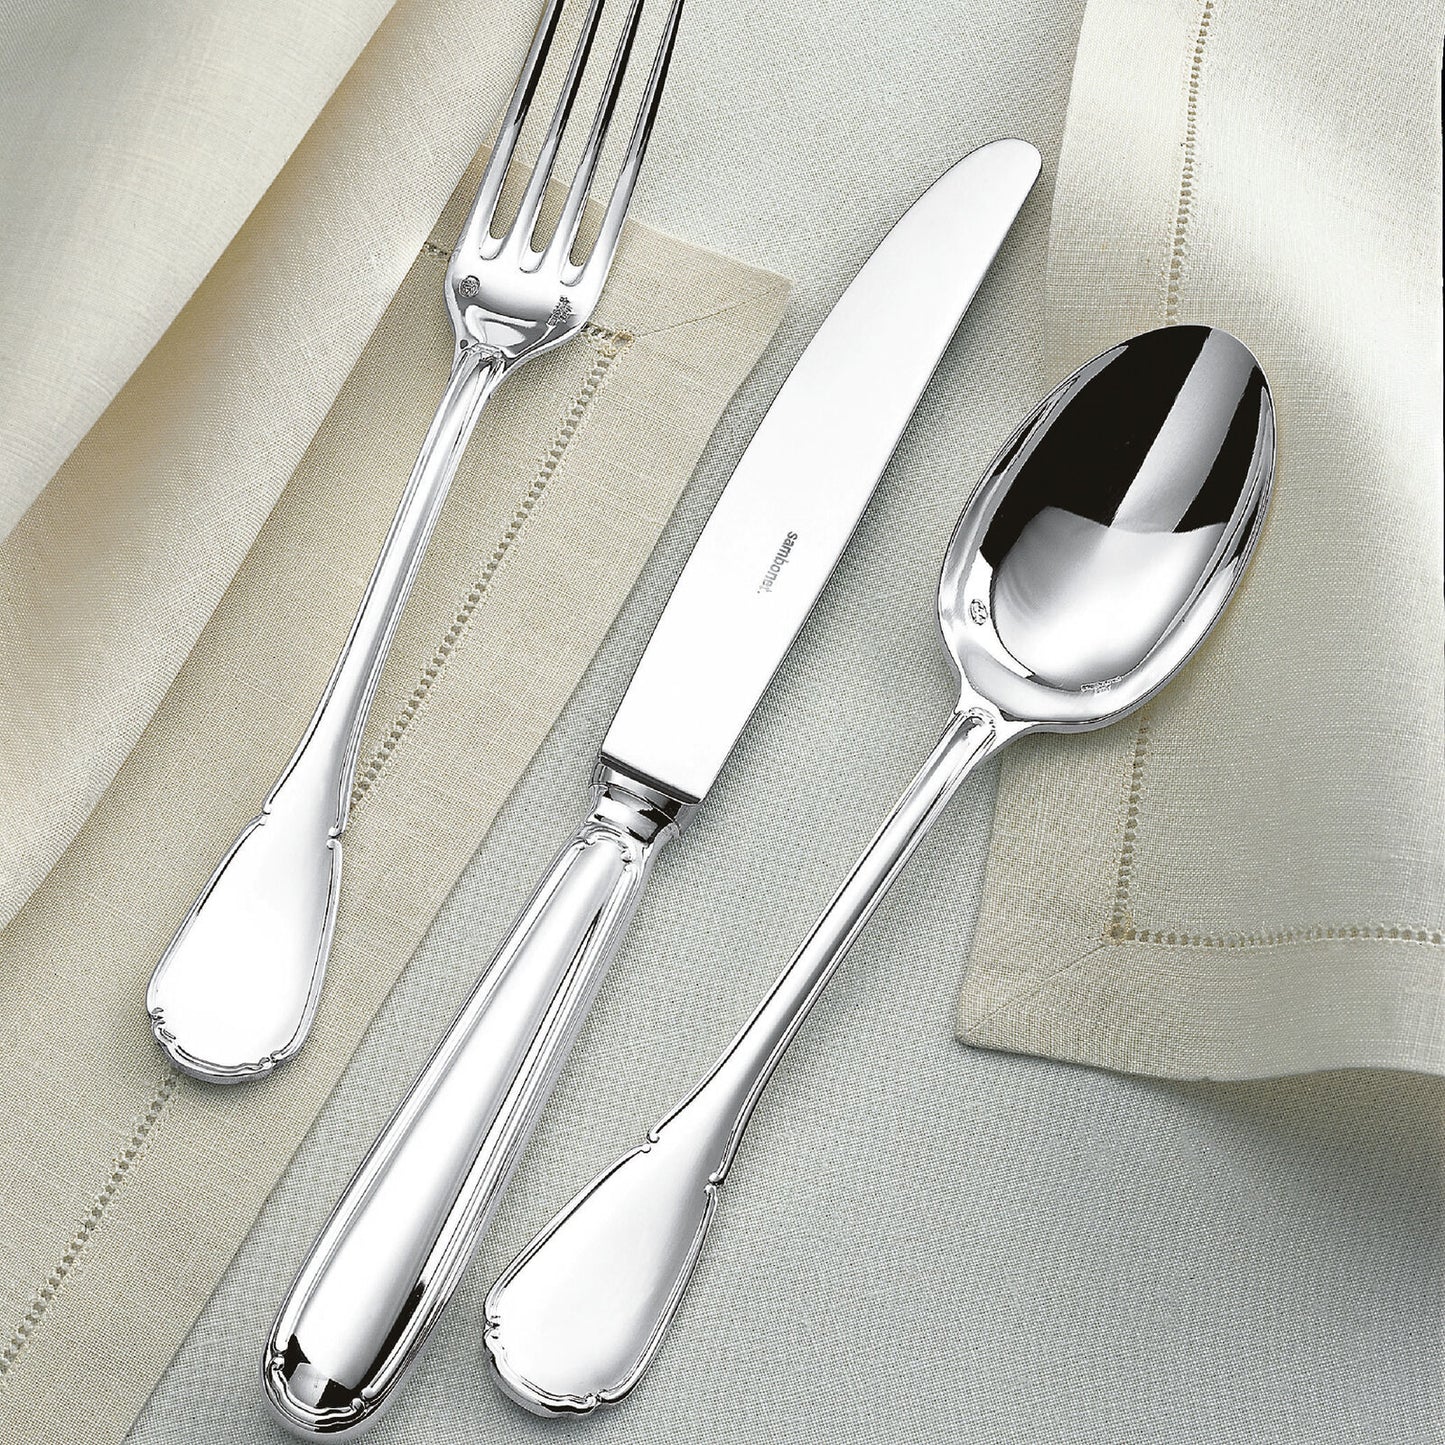 Flatware Set, Silver Plated Baroque, 72 pcs for 12 person